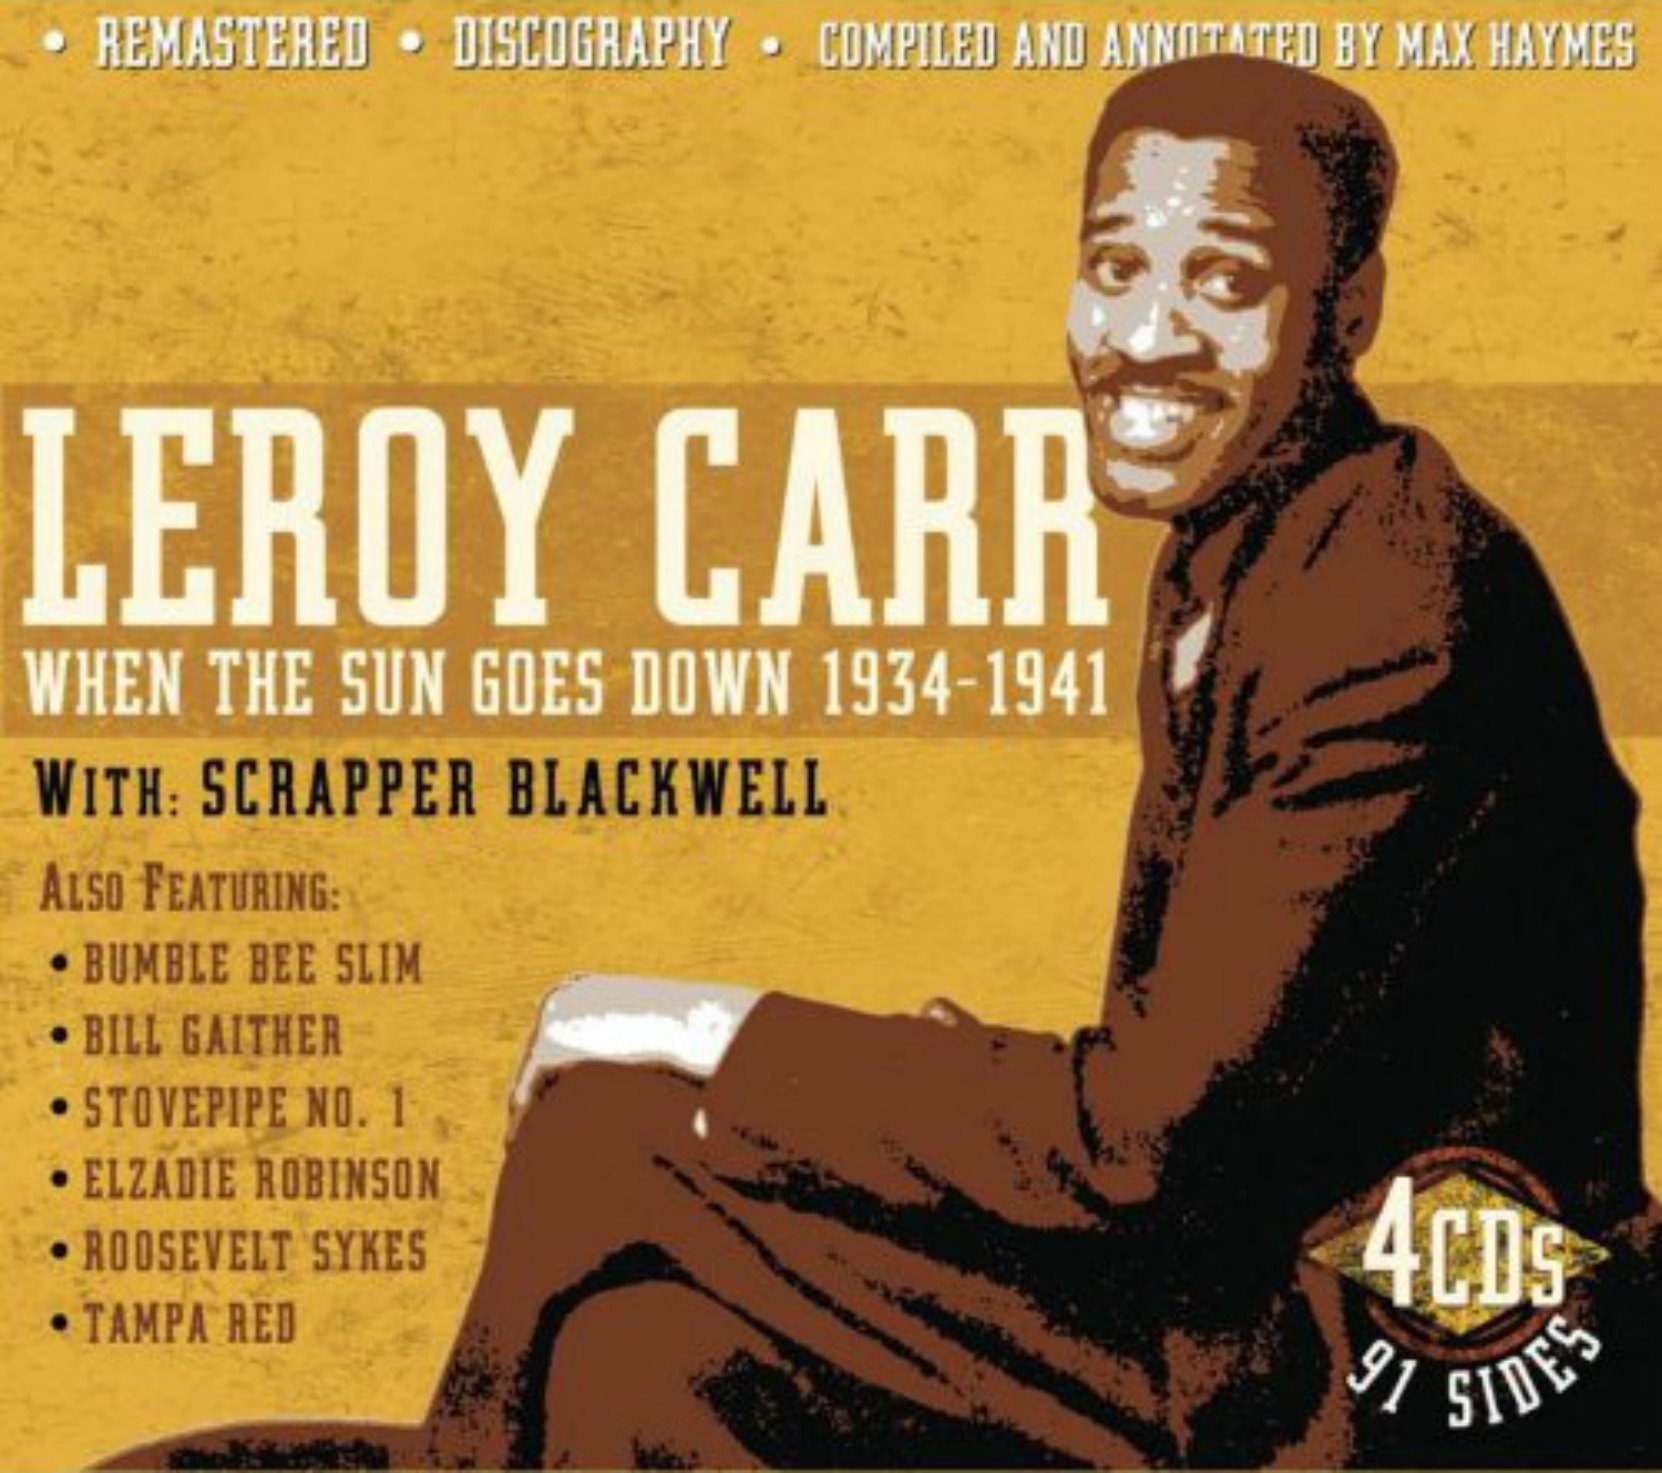 CD cover, Leroy Carr & Scrapper Blackwell- When The Sun Goes Down 1934-1941, a 4 CD box set on JSP Records